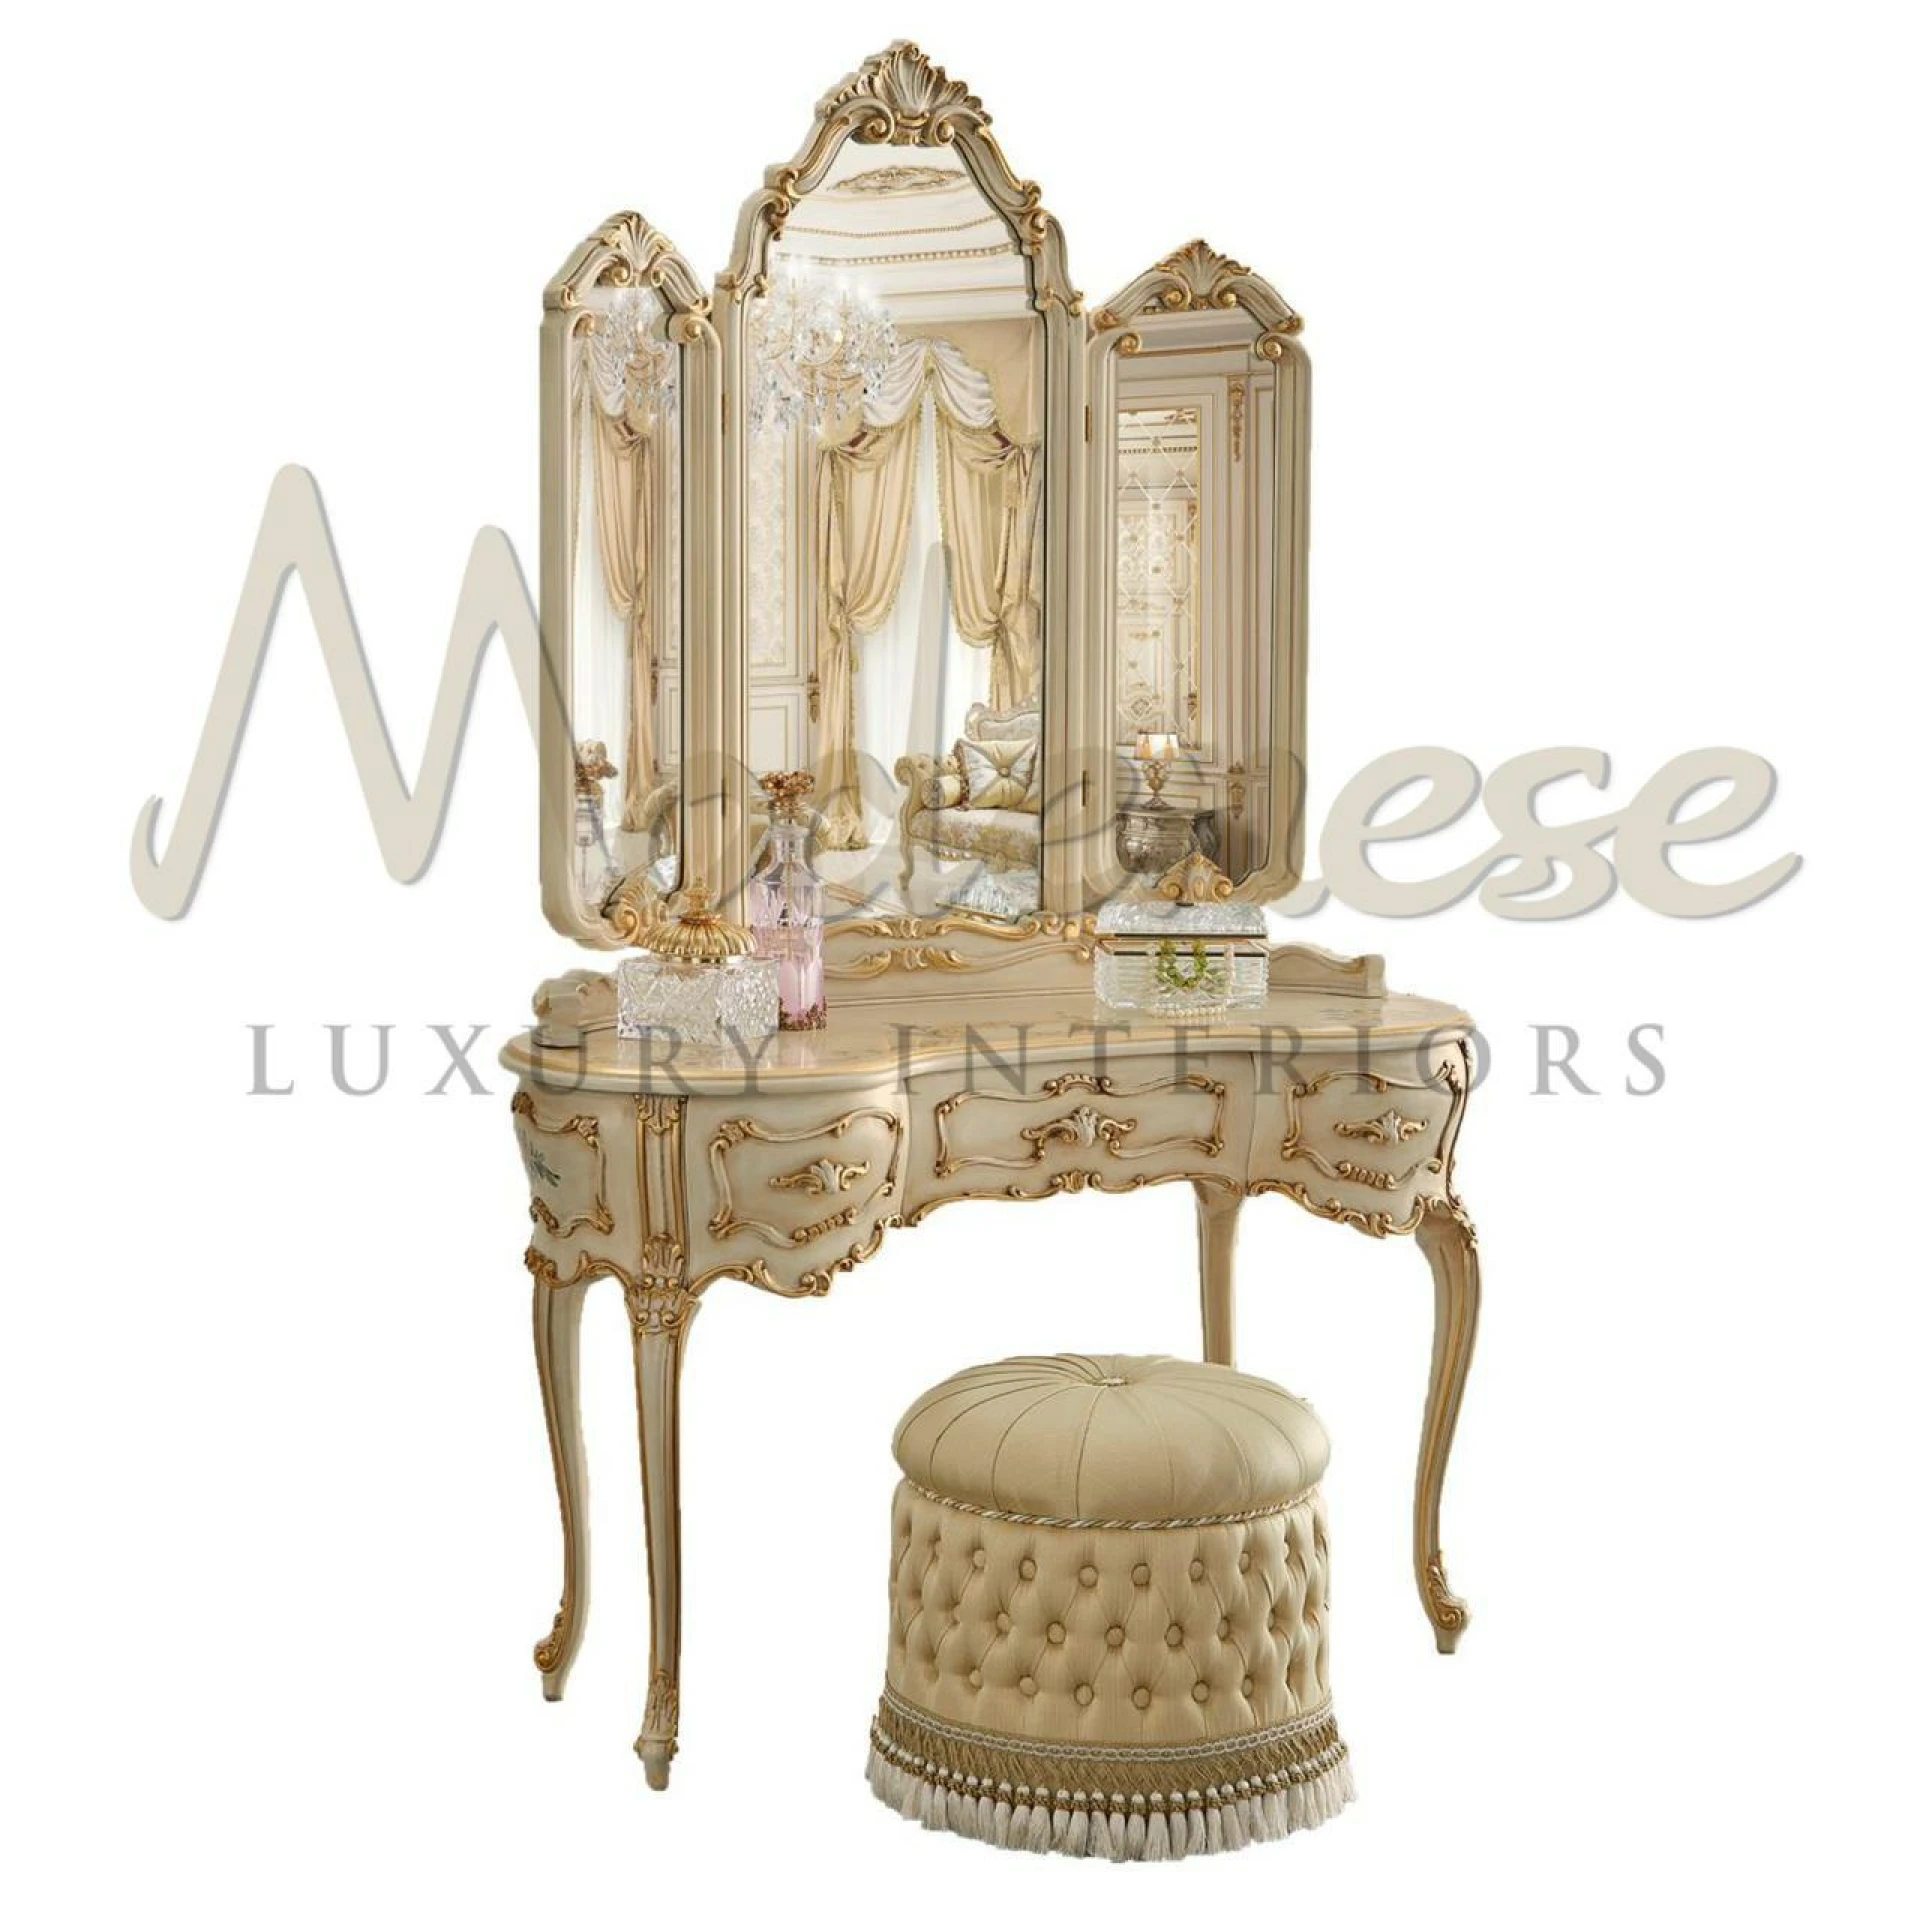 Elegantly crafted, our bean-shaped Victorian-style dressing table brings timeless charm to your space, with intricate detailing and ample storage.